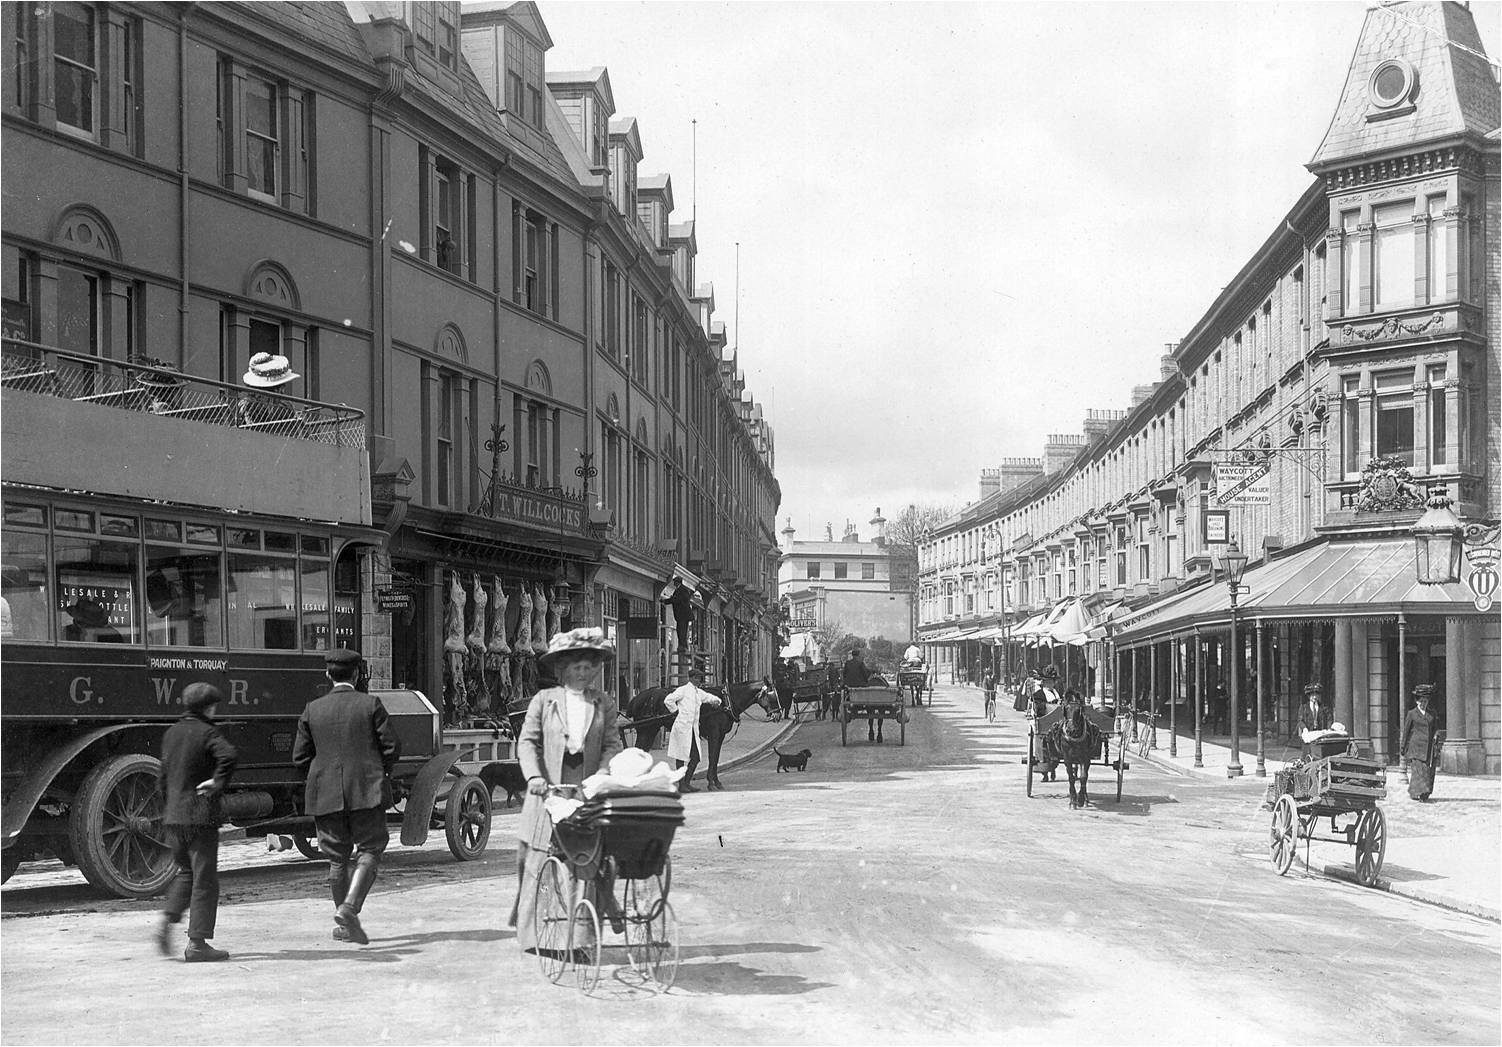 A stroll through Paignton in old pictures with Nick Pannell